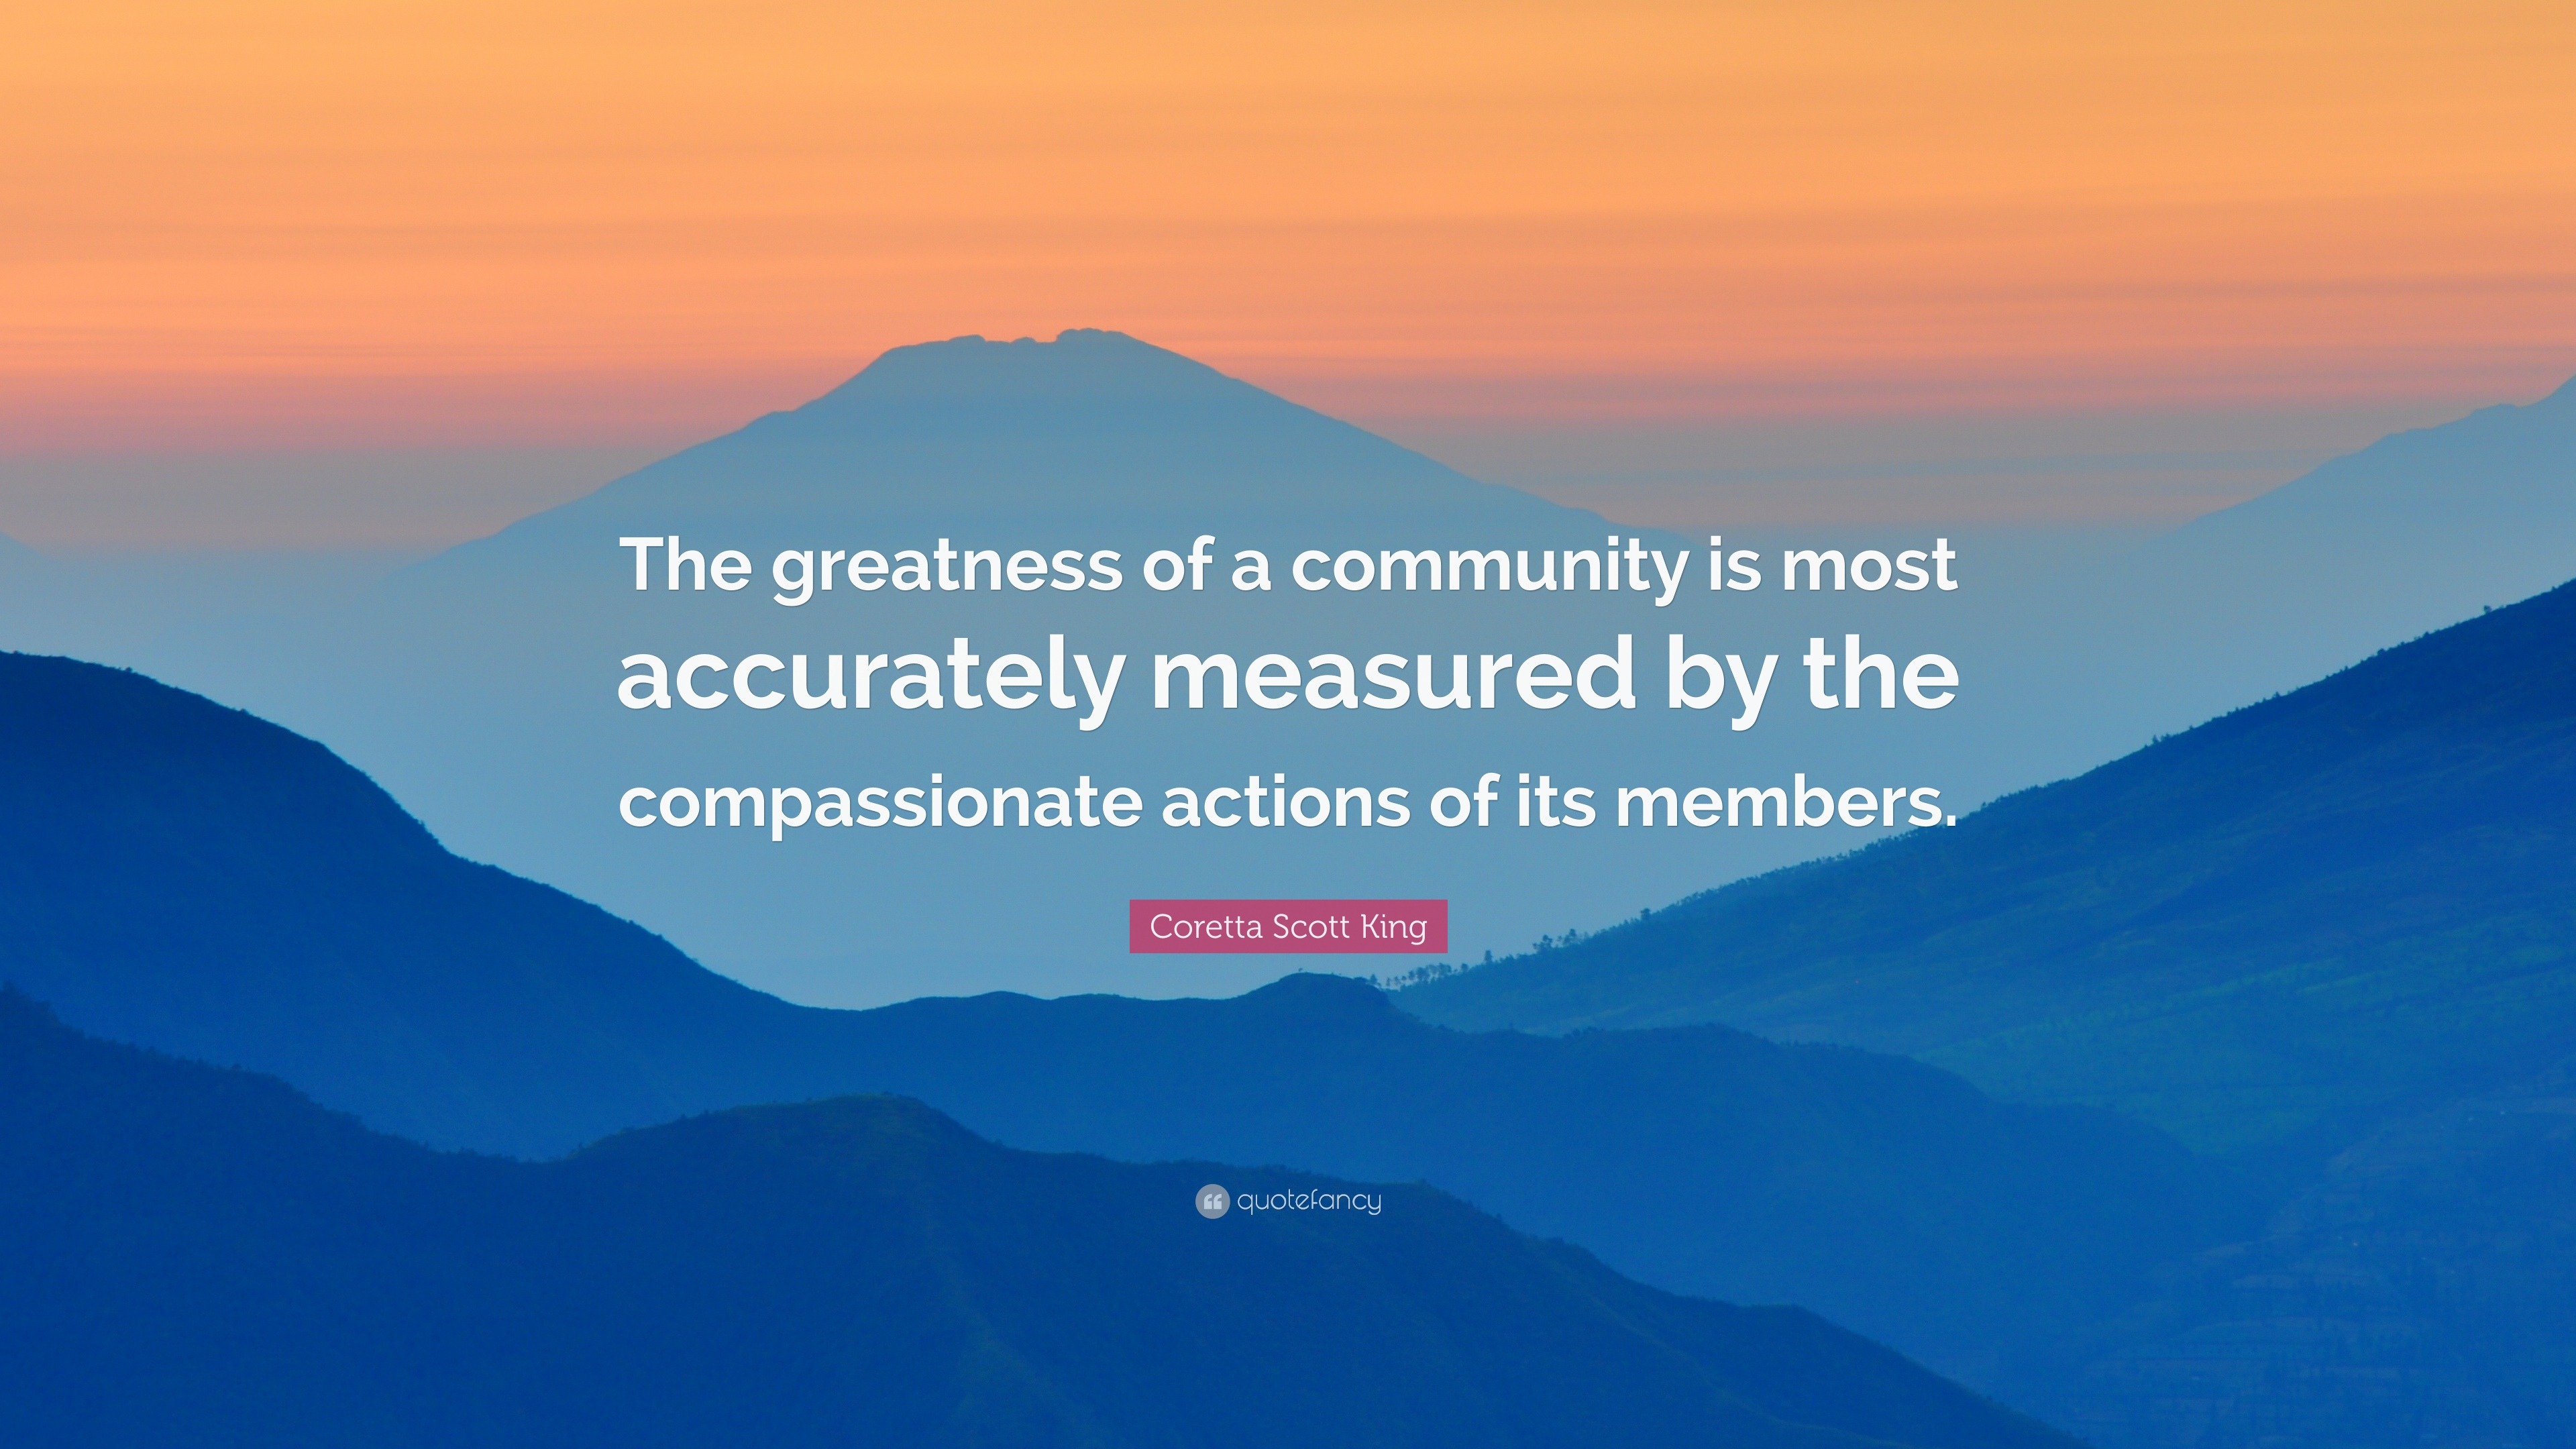 Coretta Scott King Quote: “The greatness of a community is most